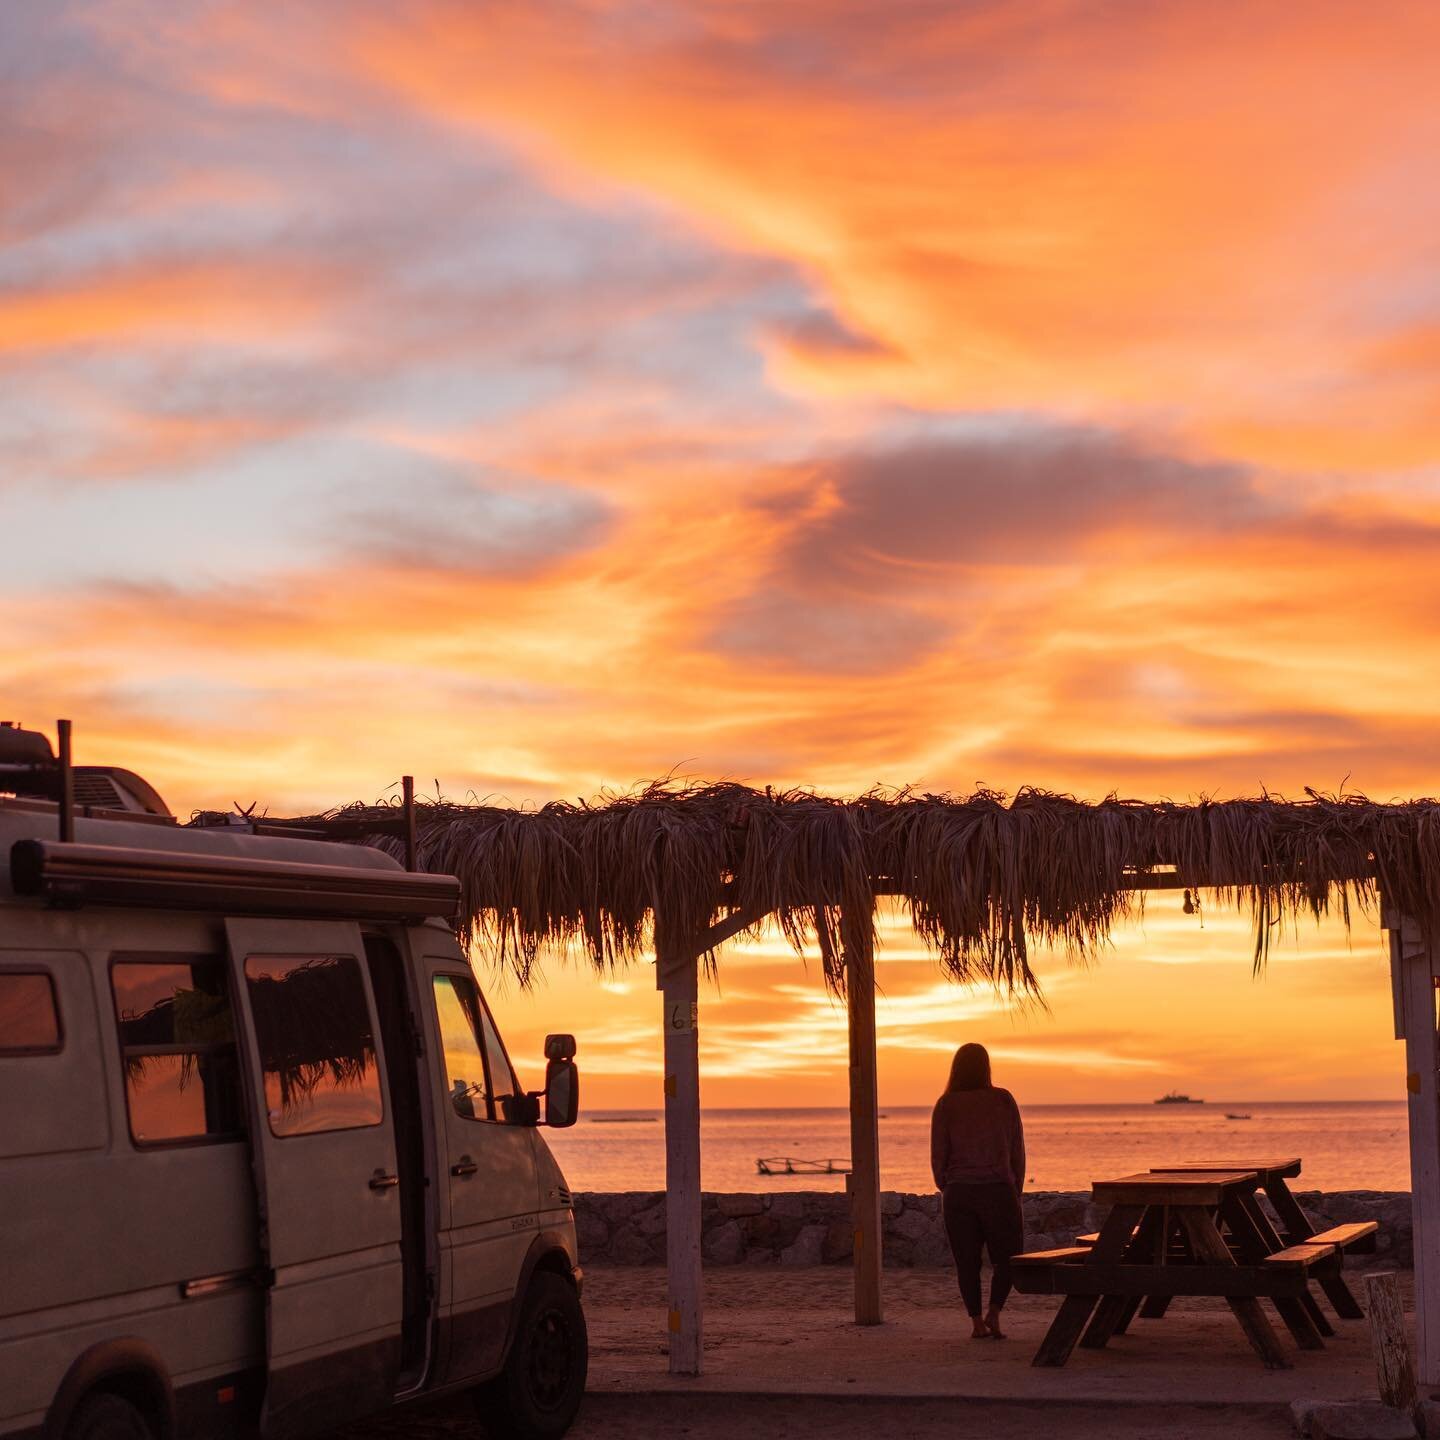 This was our last sunrise in Baja right before driving up north and crossing the border. 👌🏻
Our van is what makes our trips possible and comfortable now. But there are plenty of other travelers we met in Baja that just pitch a tent or sleep in the 